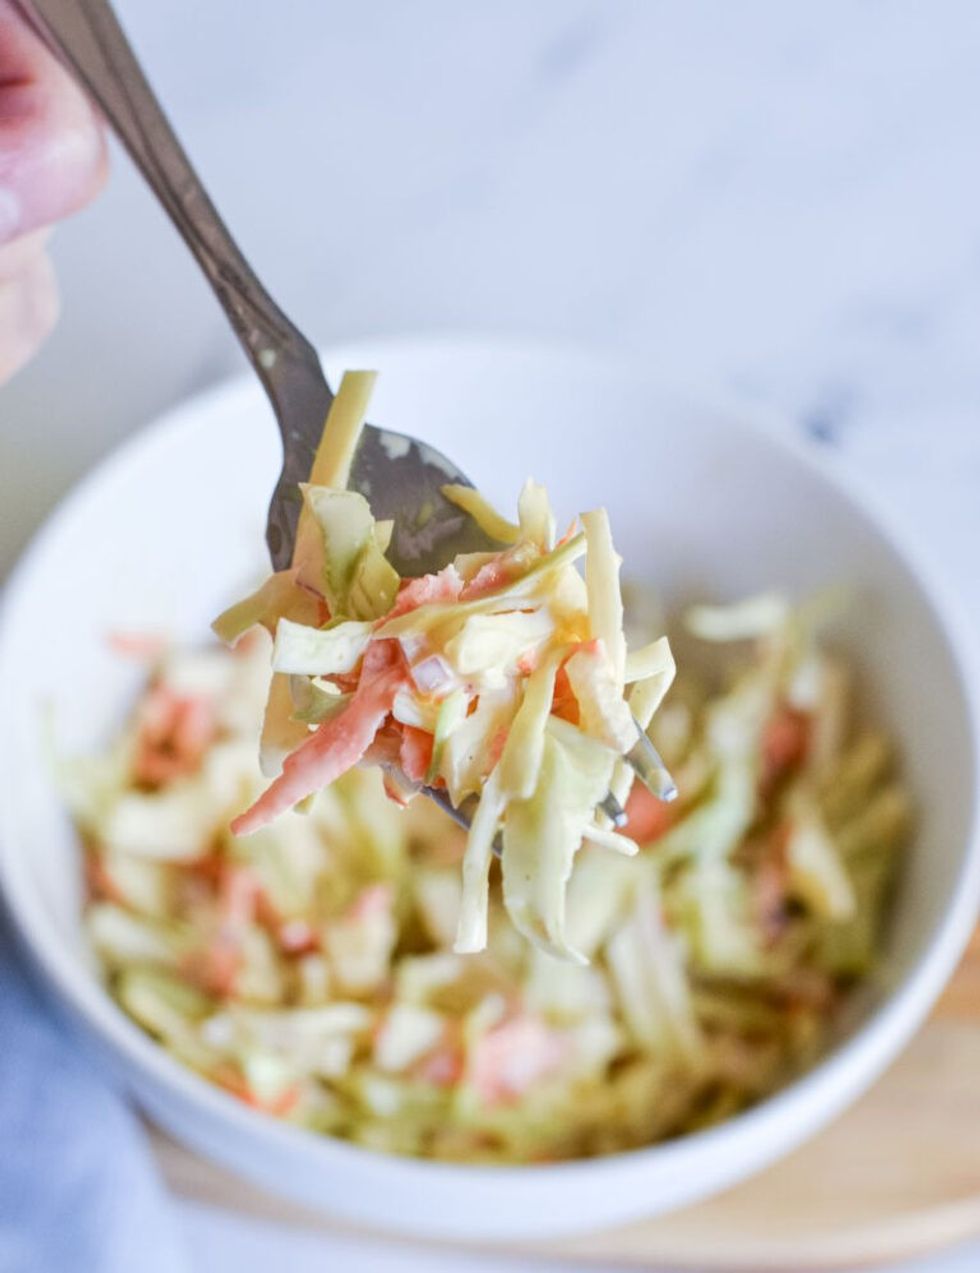 Chopped Cabbage as Salad